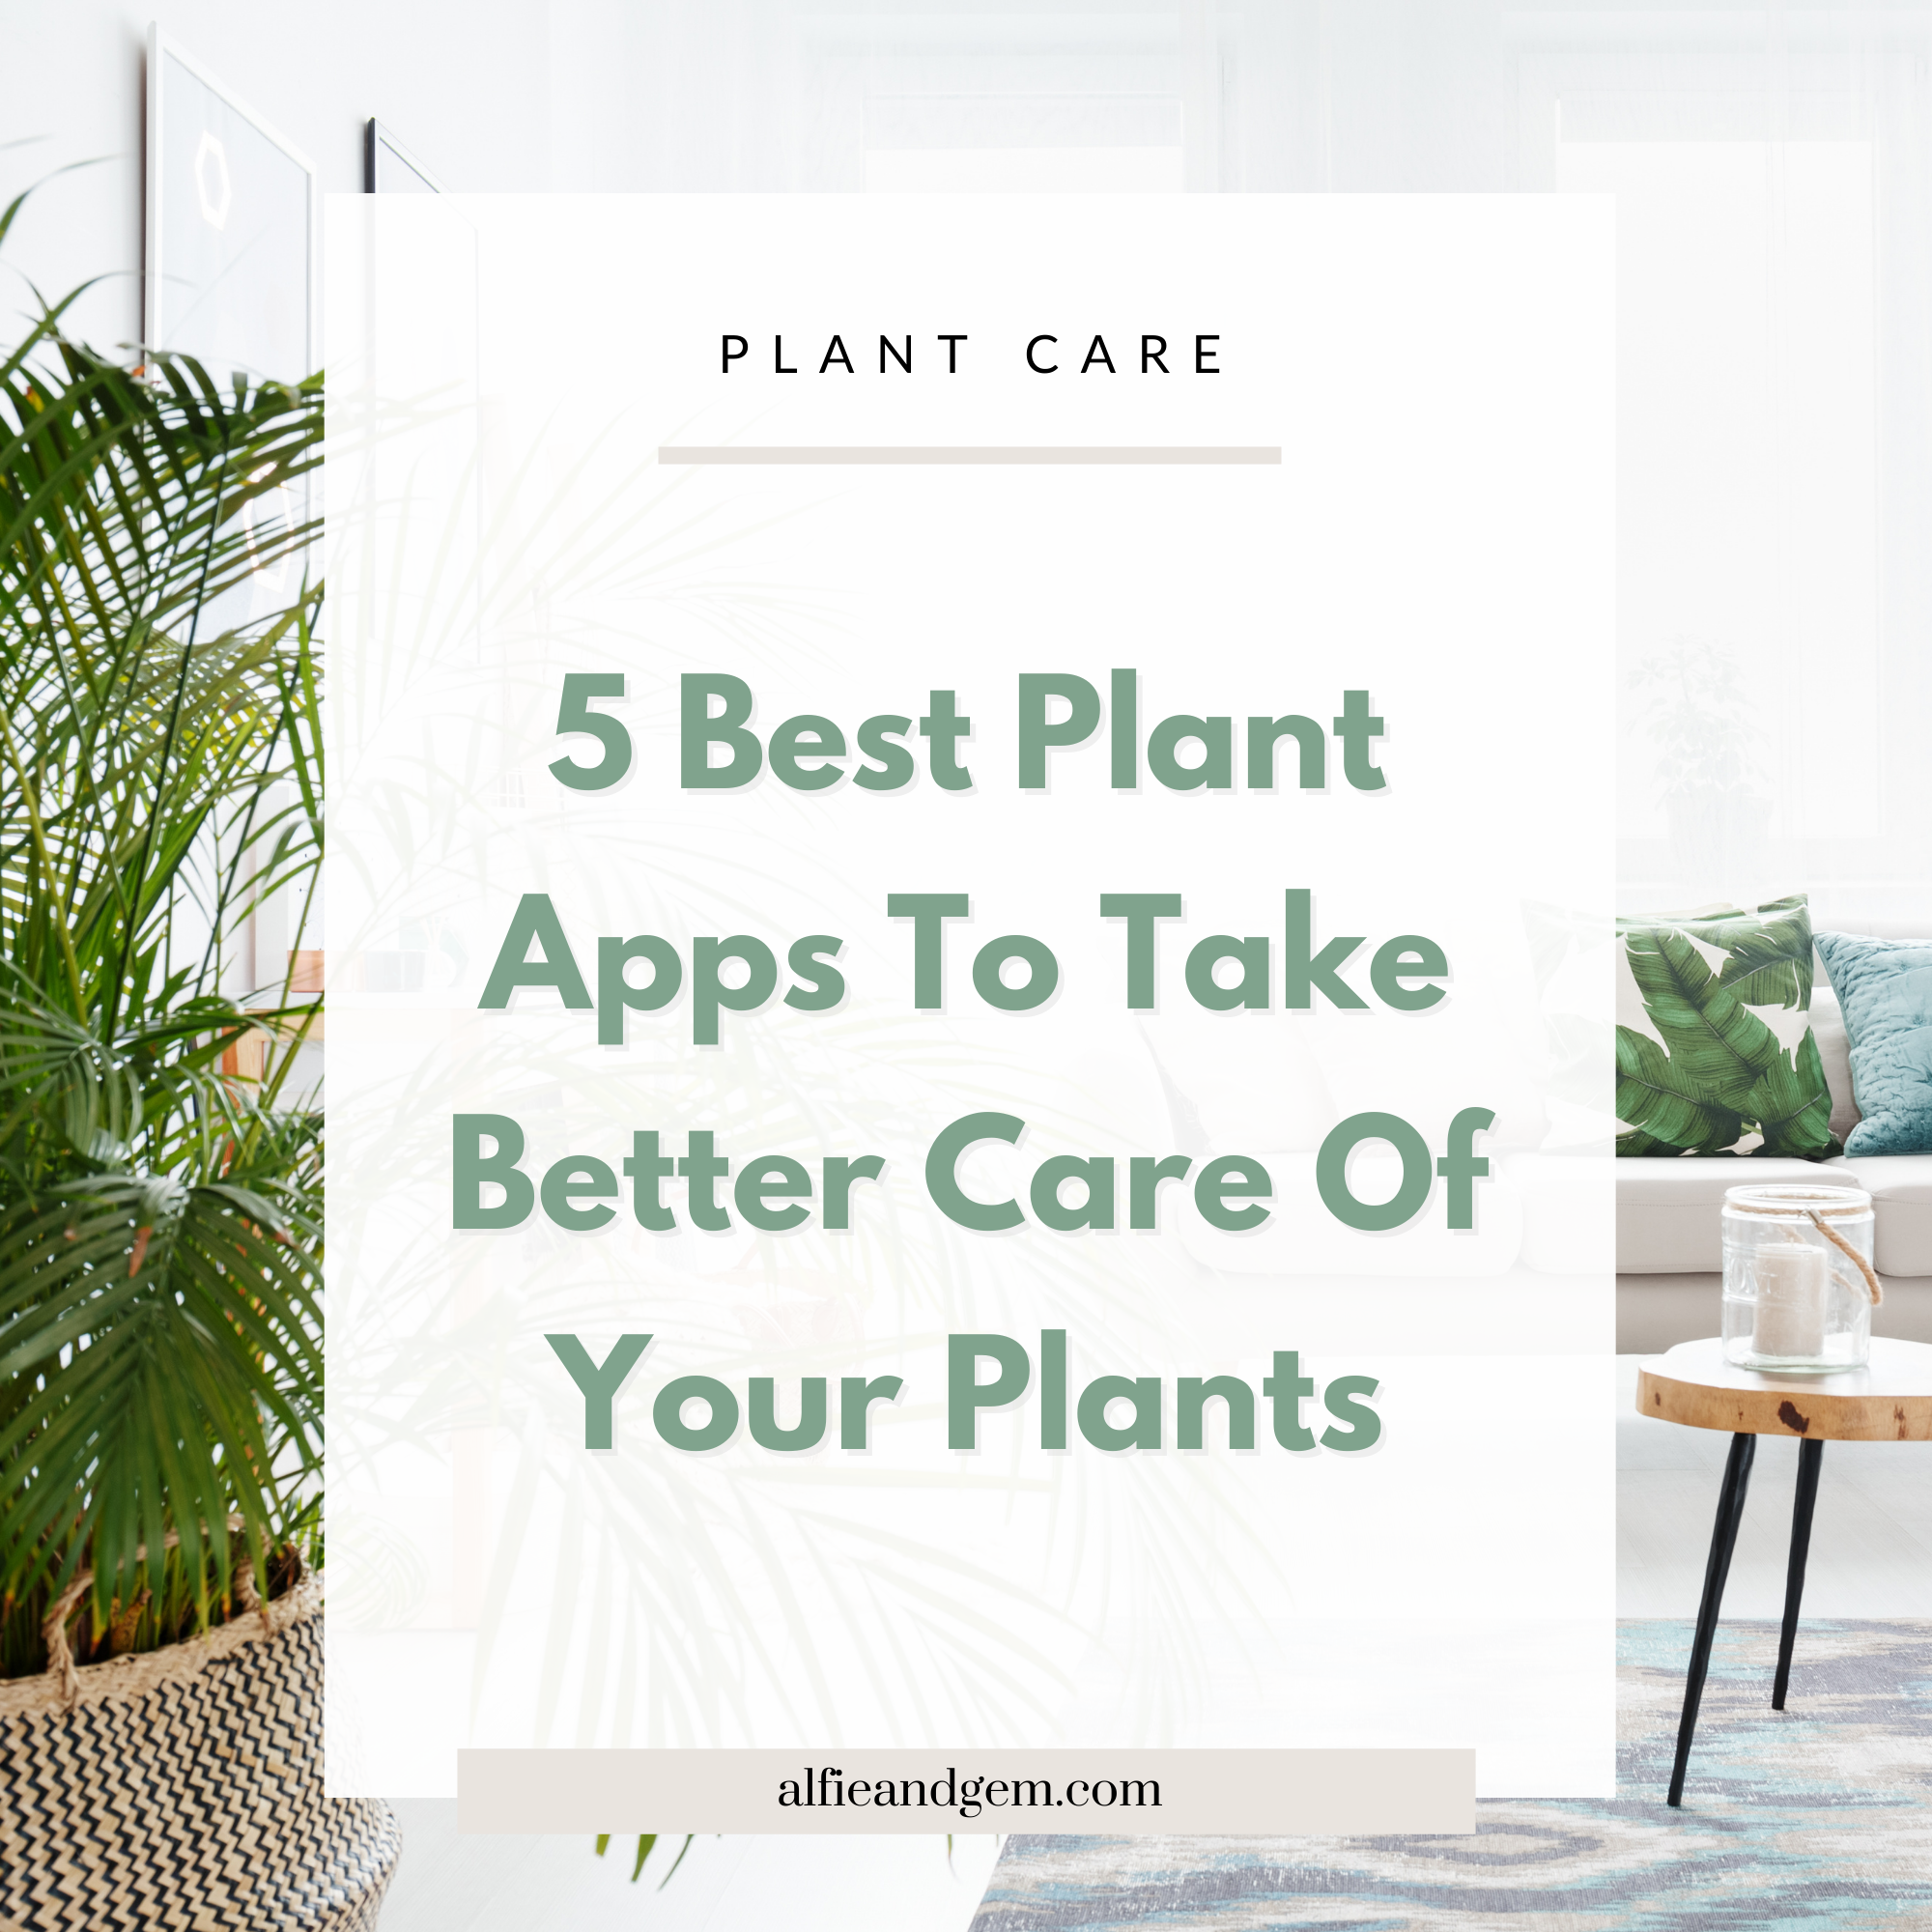 How to Tell The Health of Your Flower Plants ｜EYOUAGRO